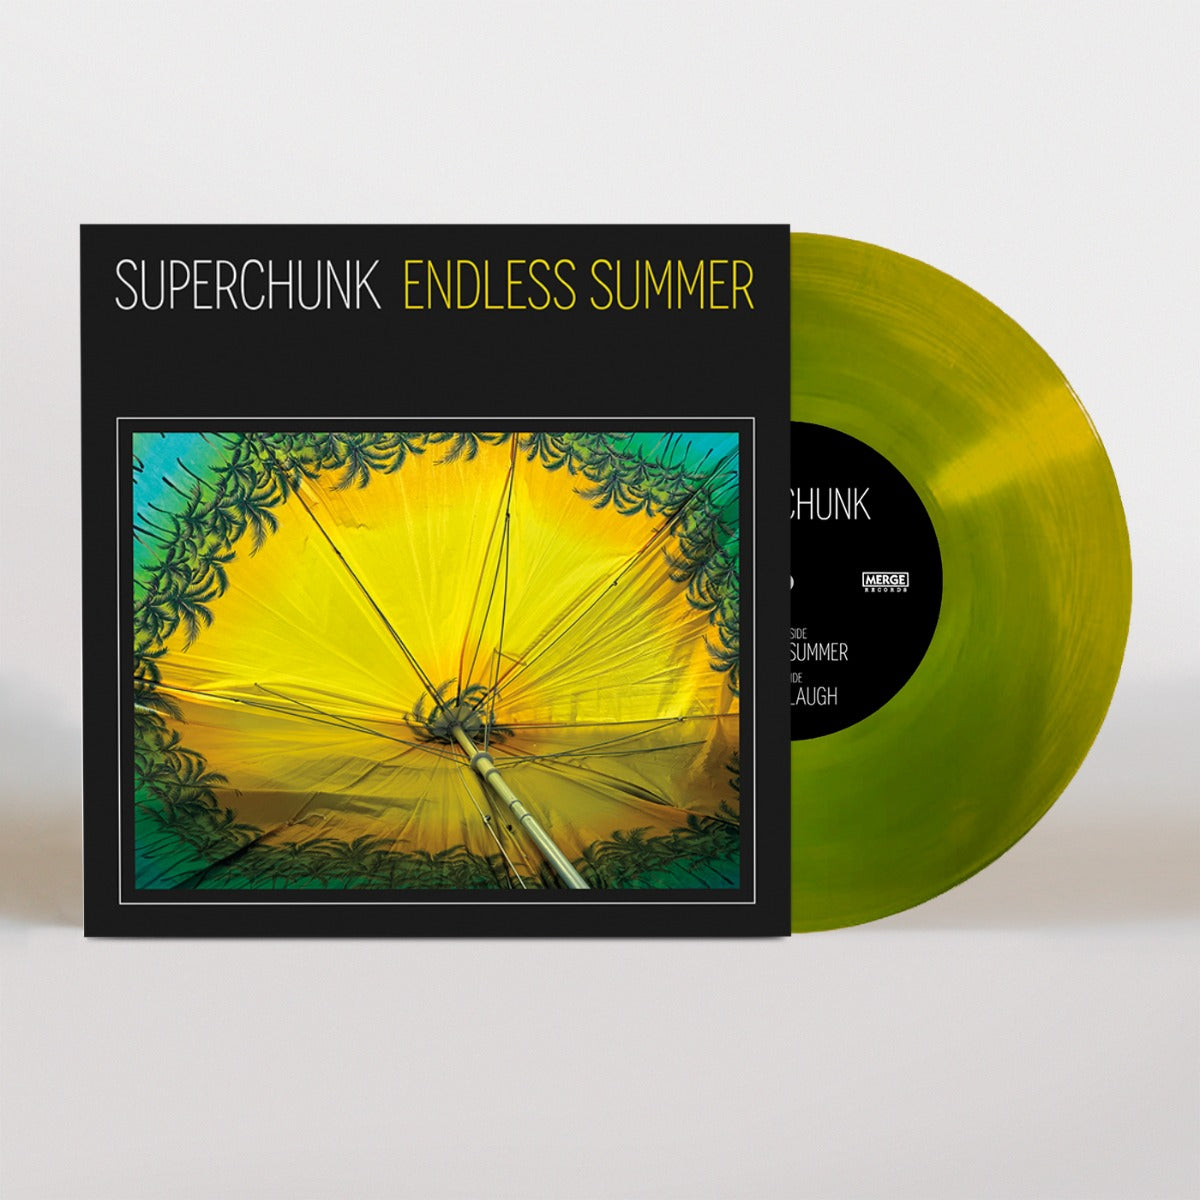 Superchunk "Endless Summer" b/w "When I Laugh" 7-inch INDIE EXCLUSIVE VARIANT Vinyl - Paladin Vinyl